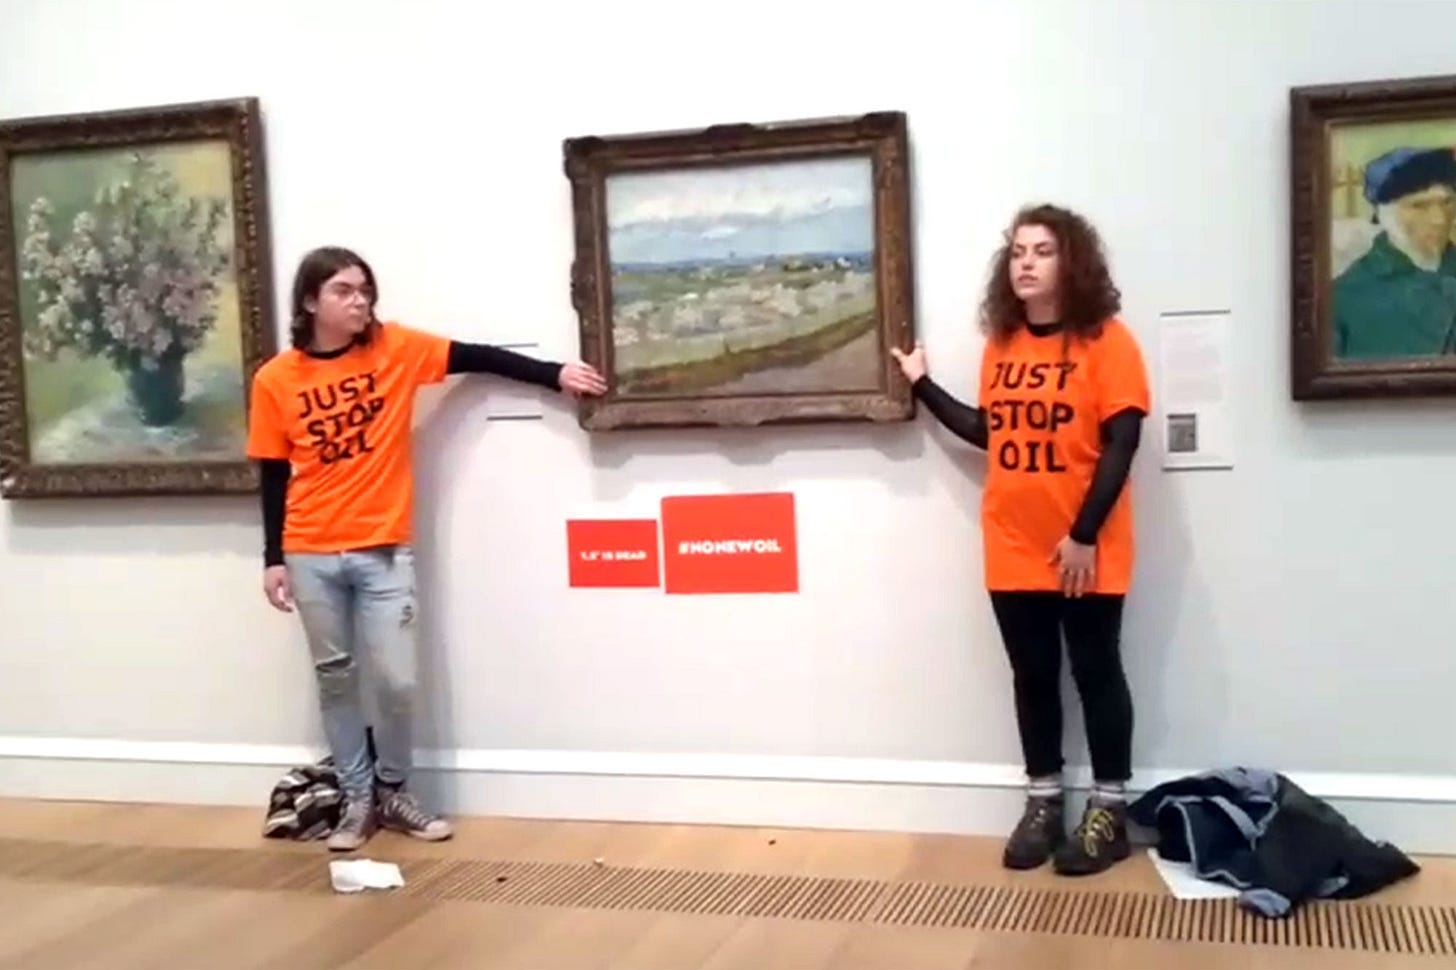 Climate activists glue hands to Vincent van Gogh painting, other artworks  in the UK